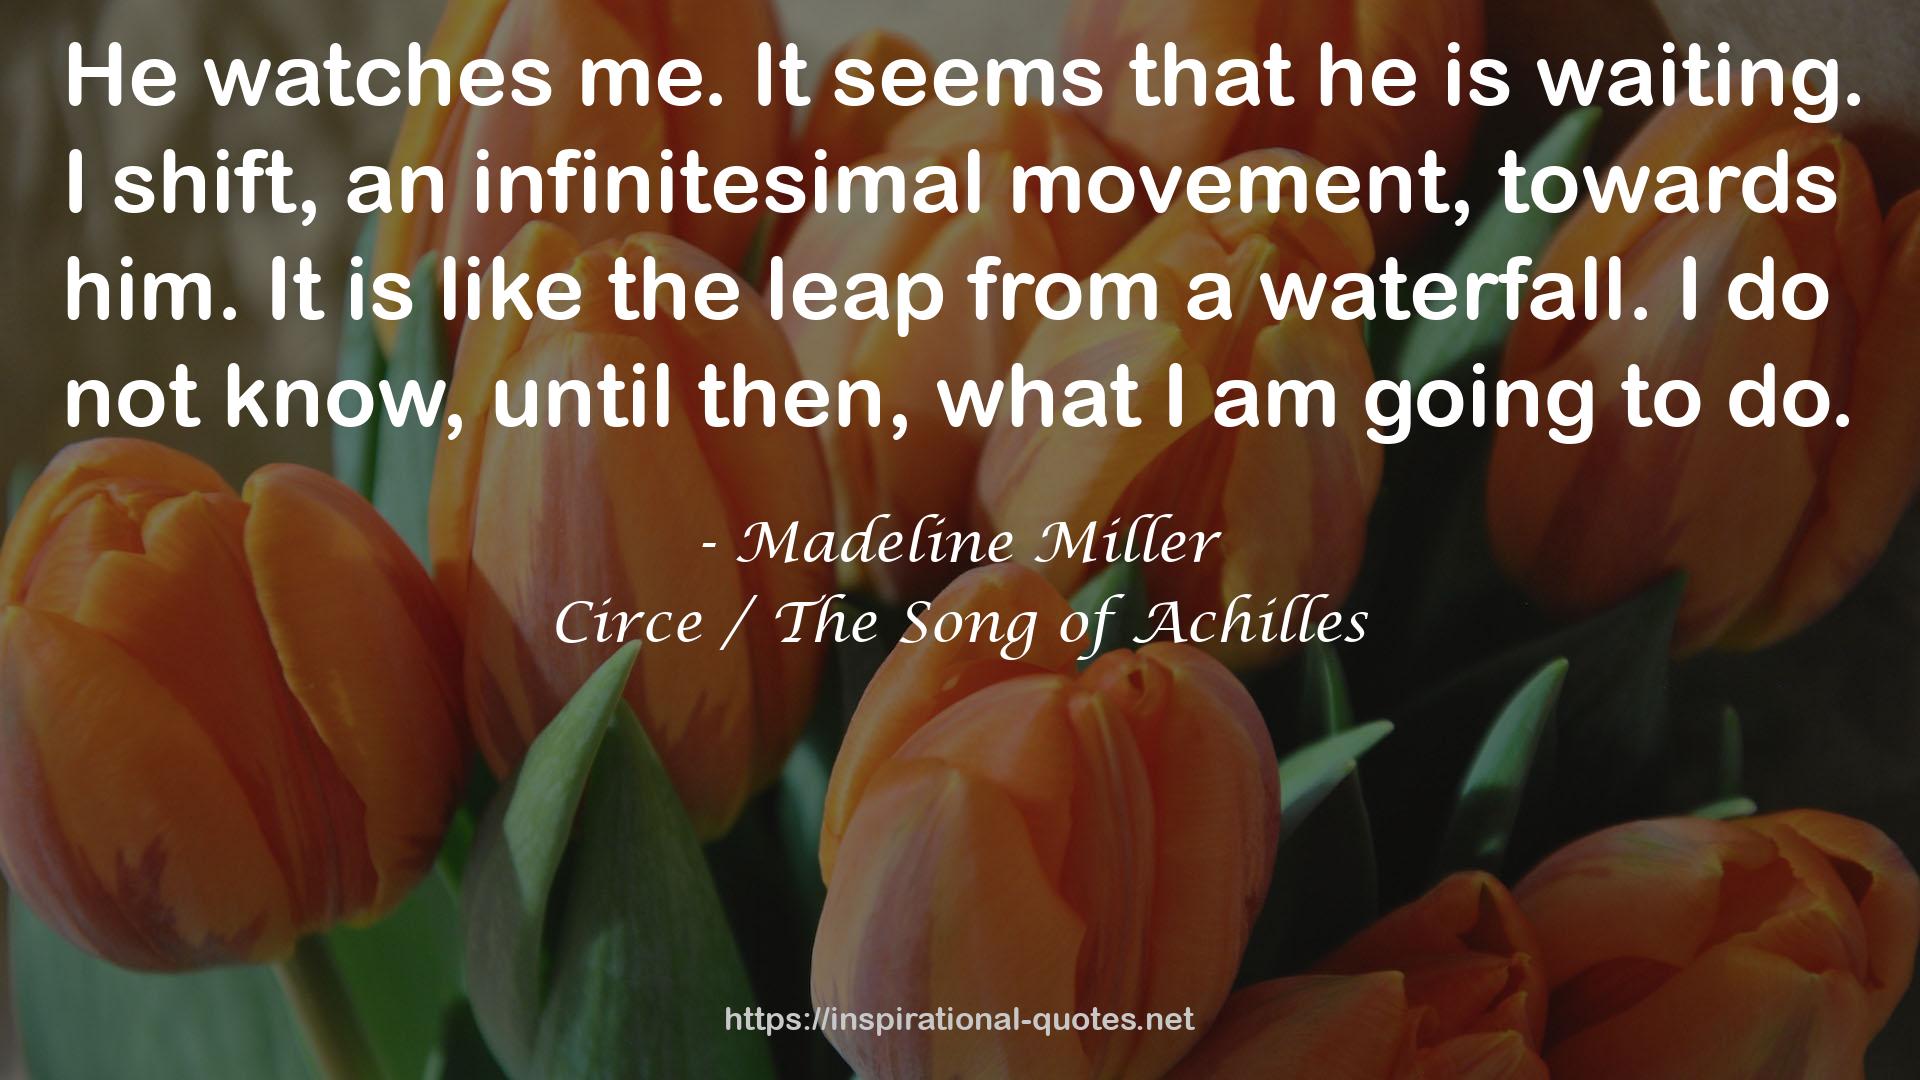 Circe / The Song of Achilles QUOTES